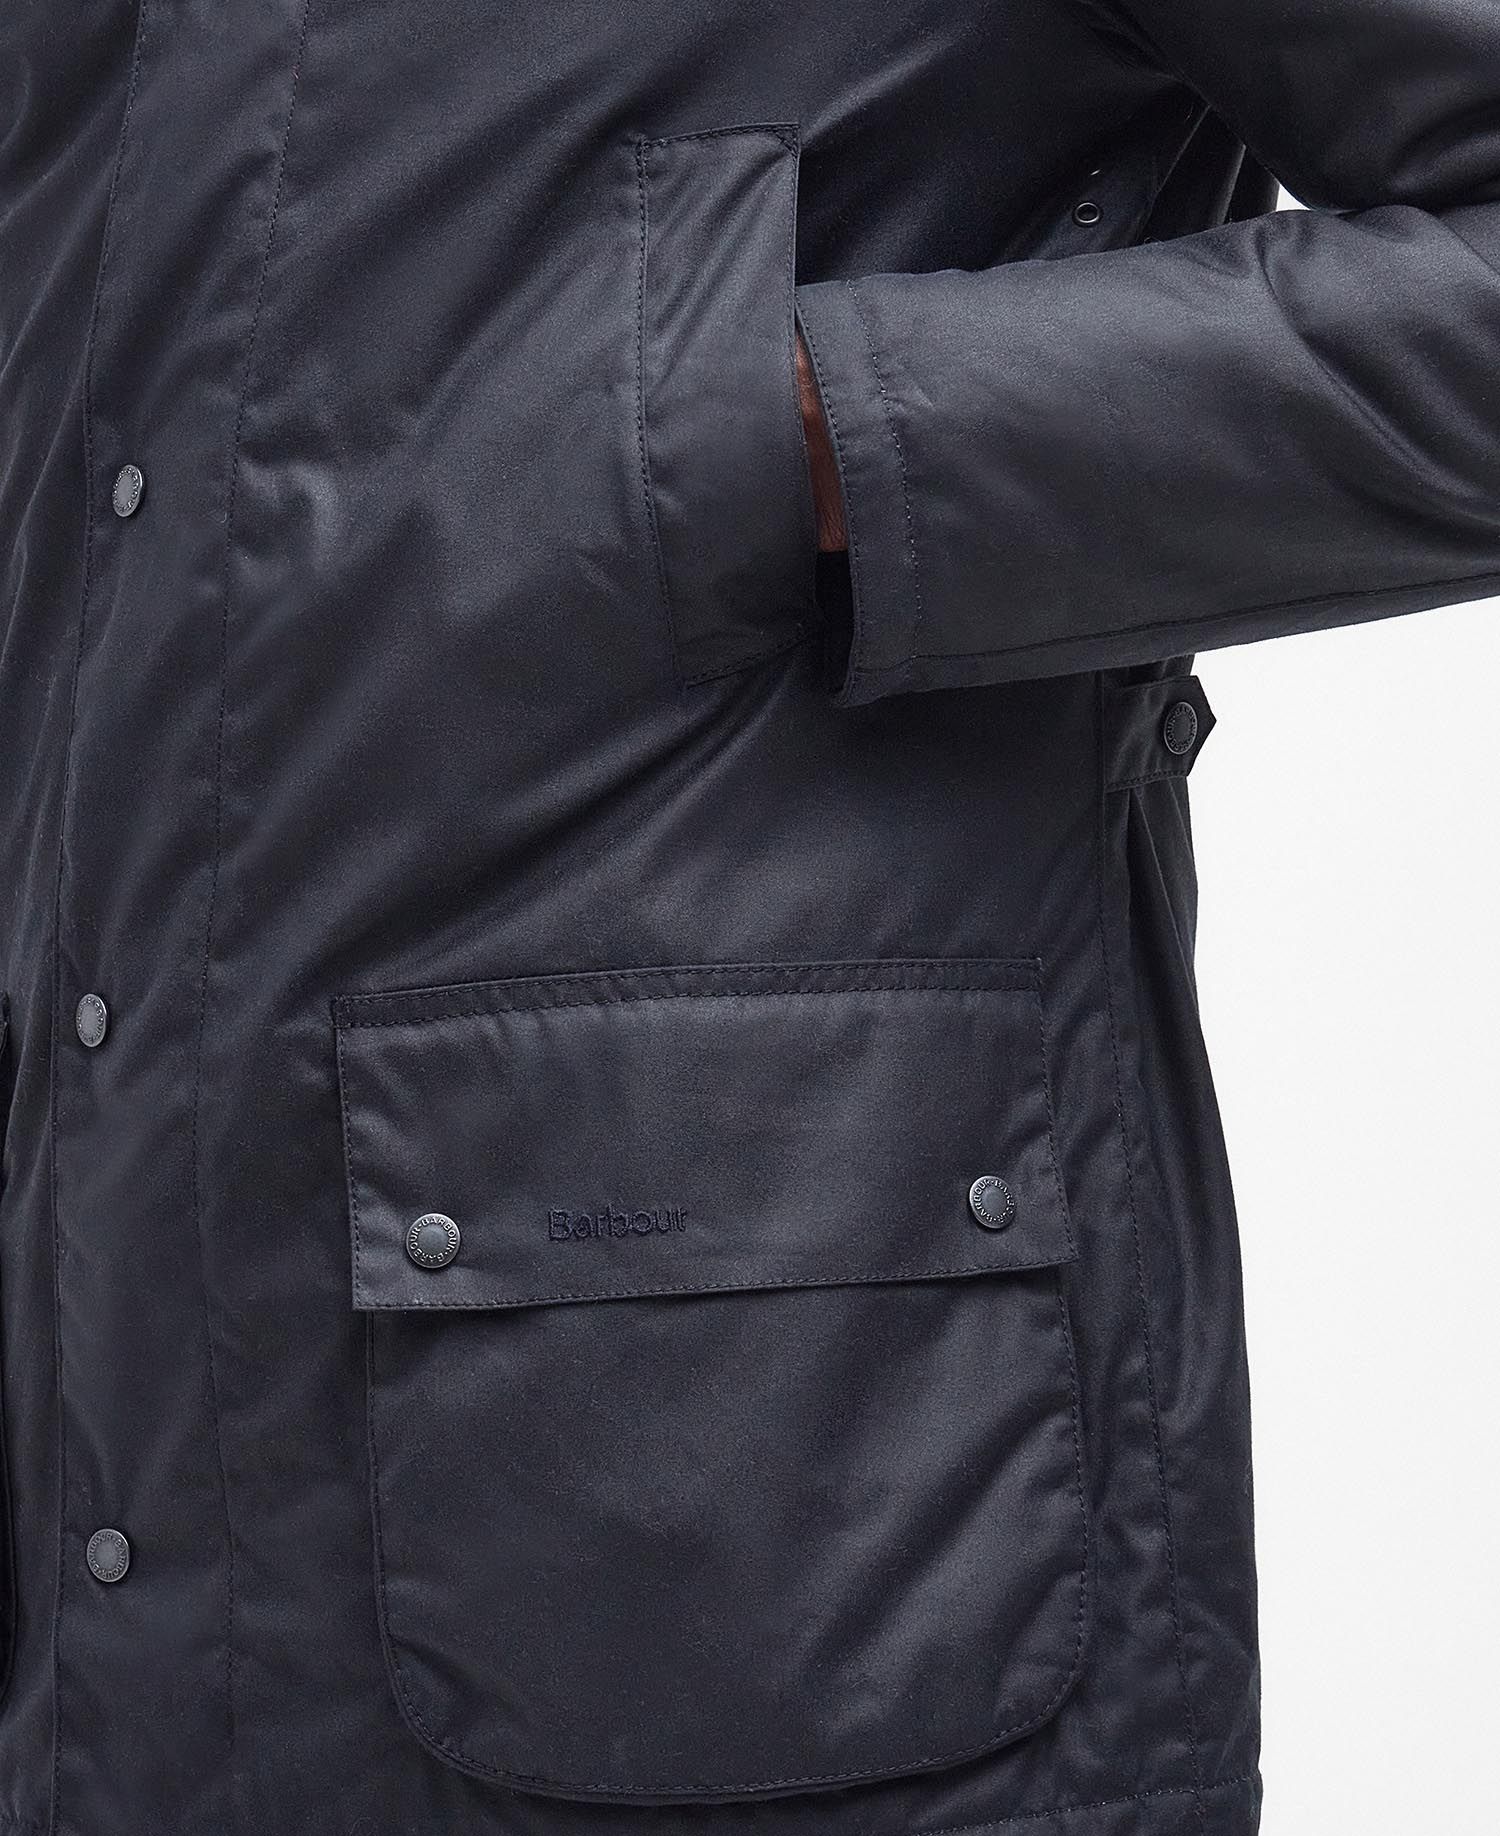 Shop the Barbour Bedale Wax Mac in Navy today. | Barbour